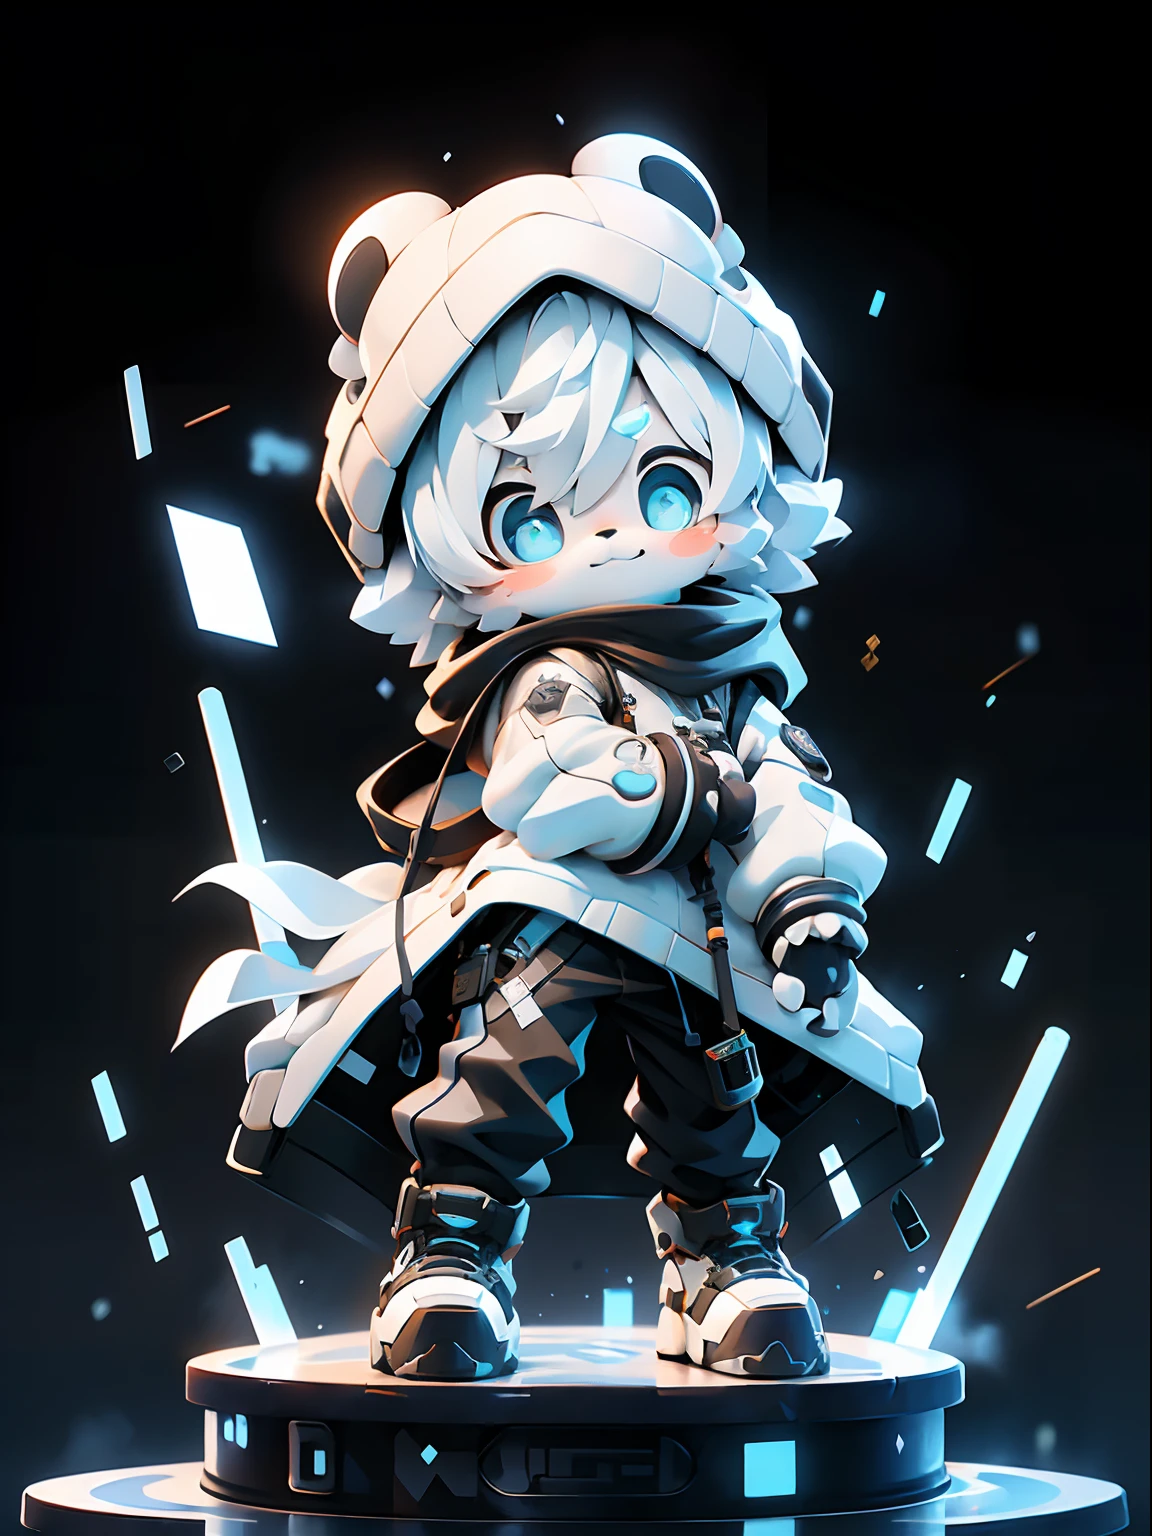 One Boy, cute smile, Blue eyes,hair black mixed white messy,White Techware  long big black mixed white long colored sweater,tear drop,Viewer's Eye Line,Black skinny pants,Panda ears, cyberpunked, is standing cool pose, baby-face, cute little, with bamboo sword